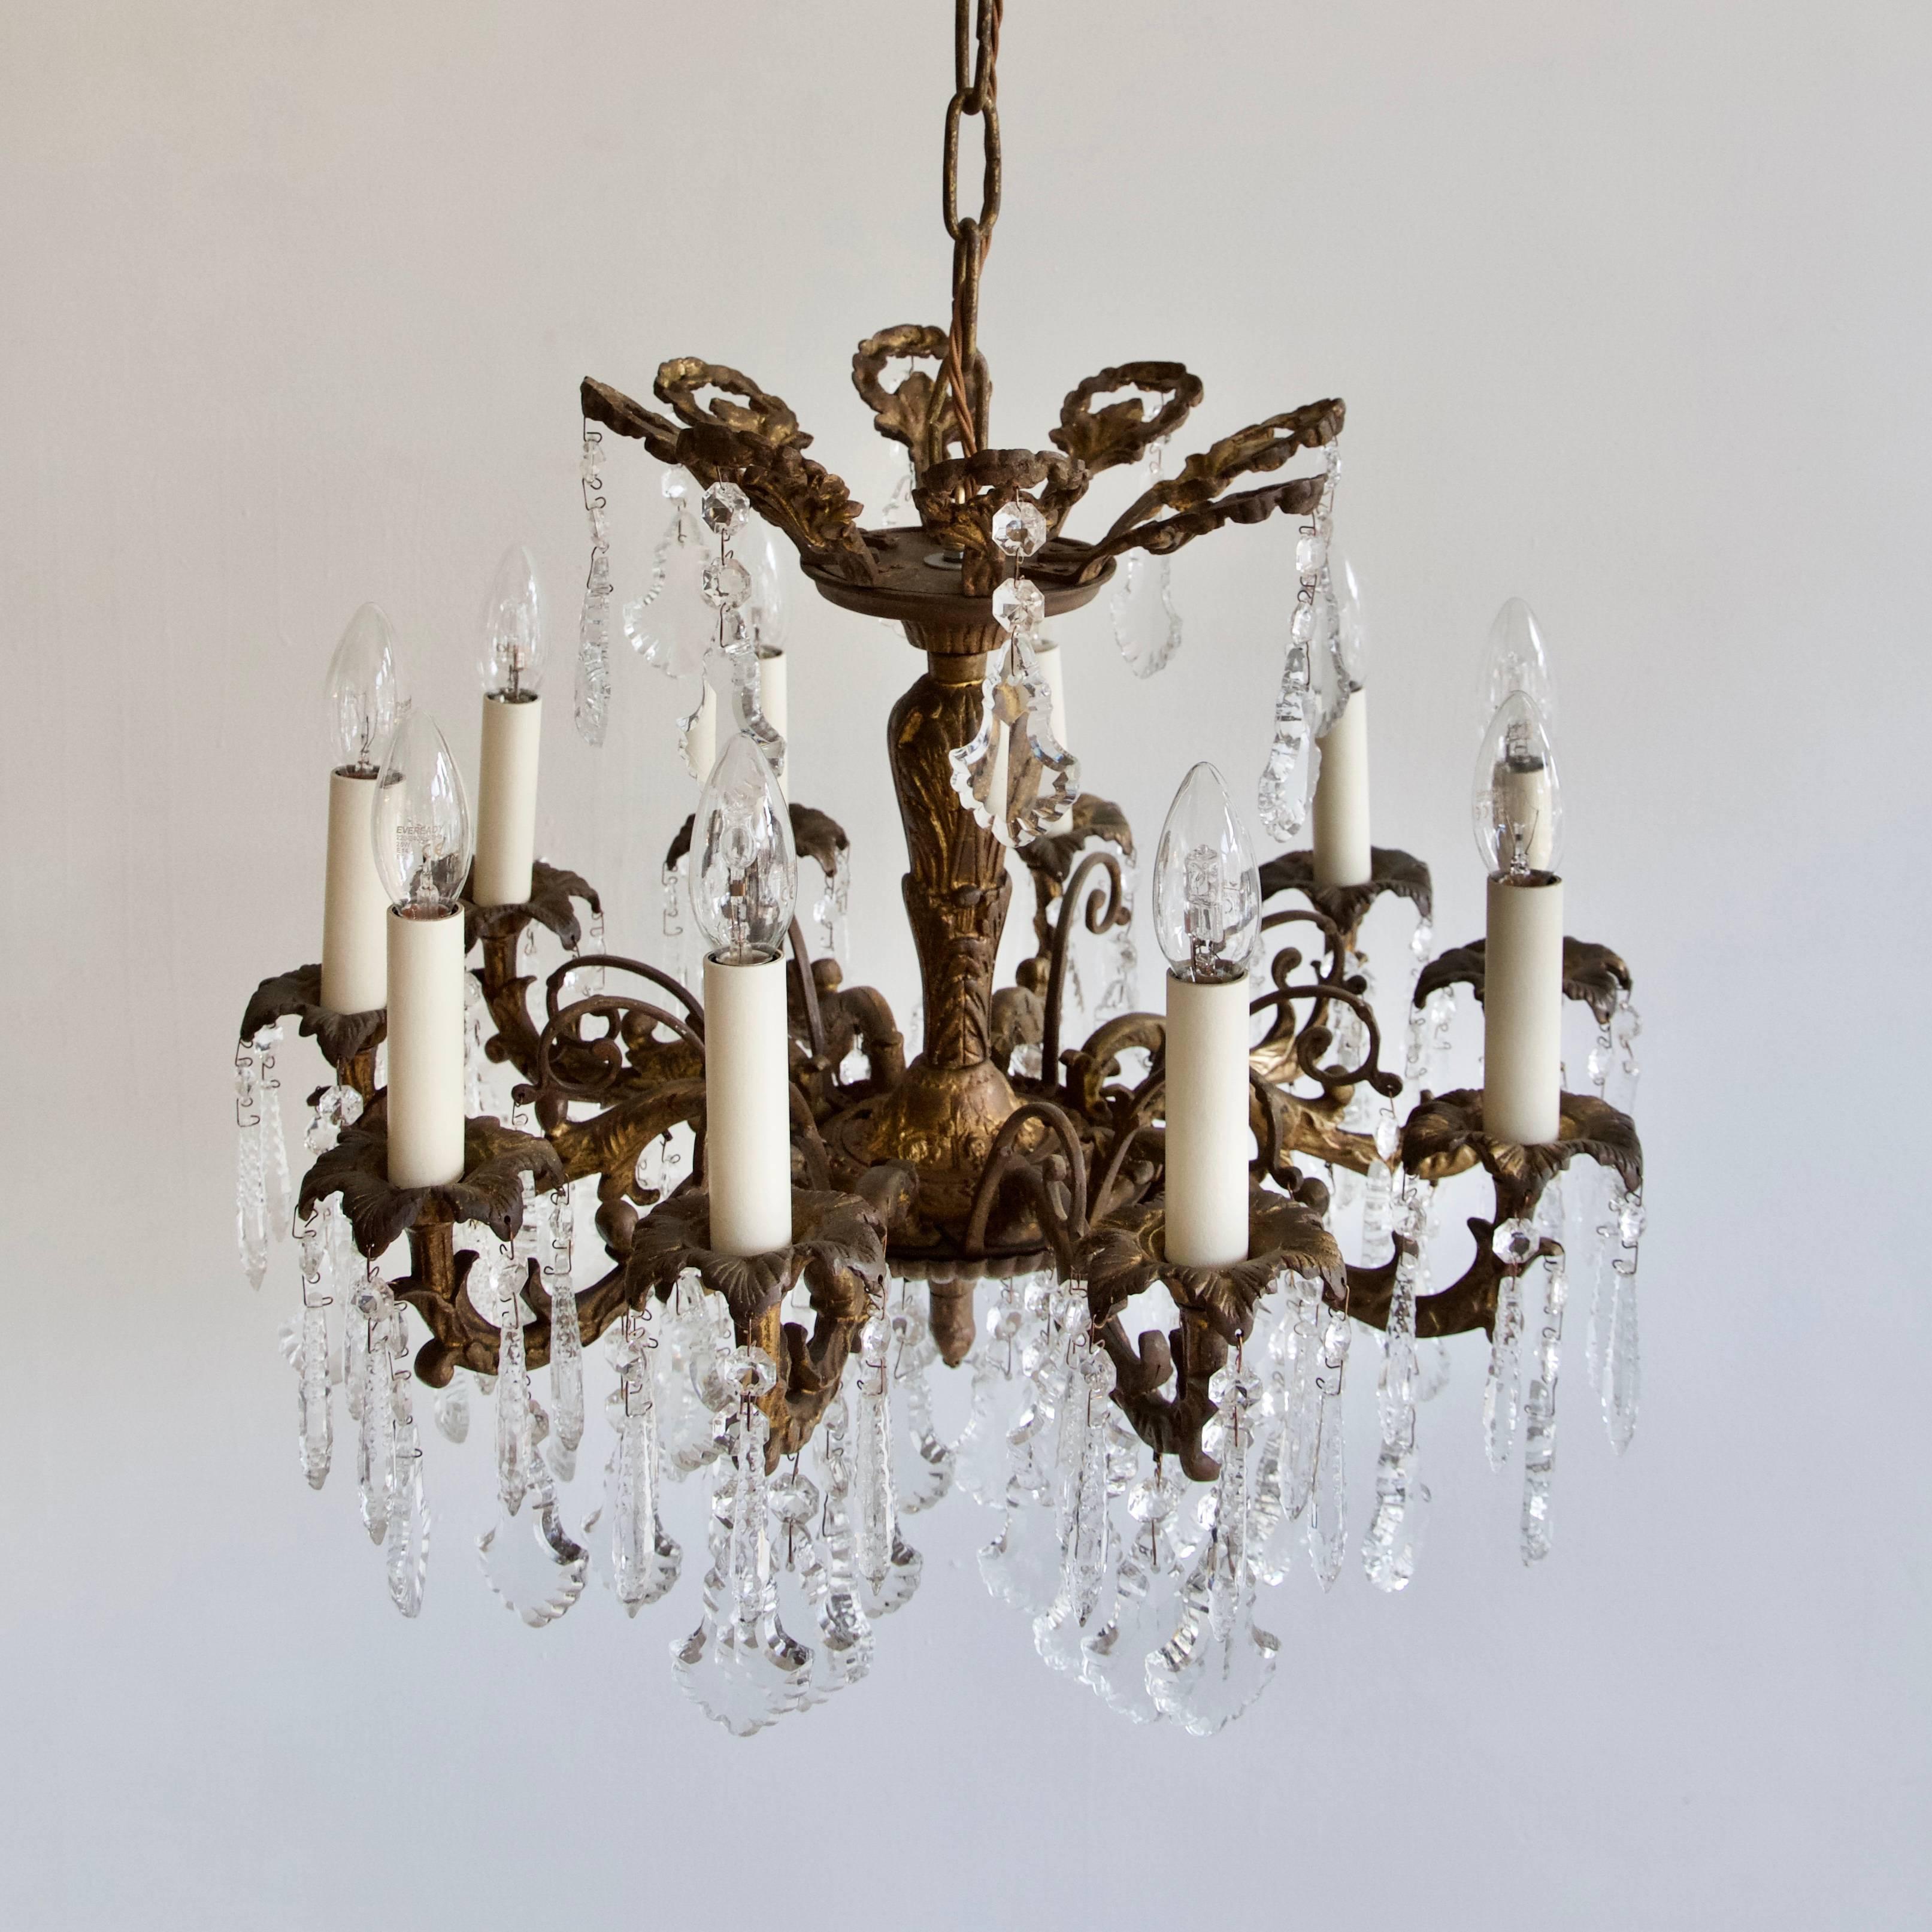 Gilt chandelier with moulded faceted glass icicles and flat leaf drops. This chandelier has eight SES, E14 lamps. Supplied with chain and ceiling rose.